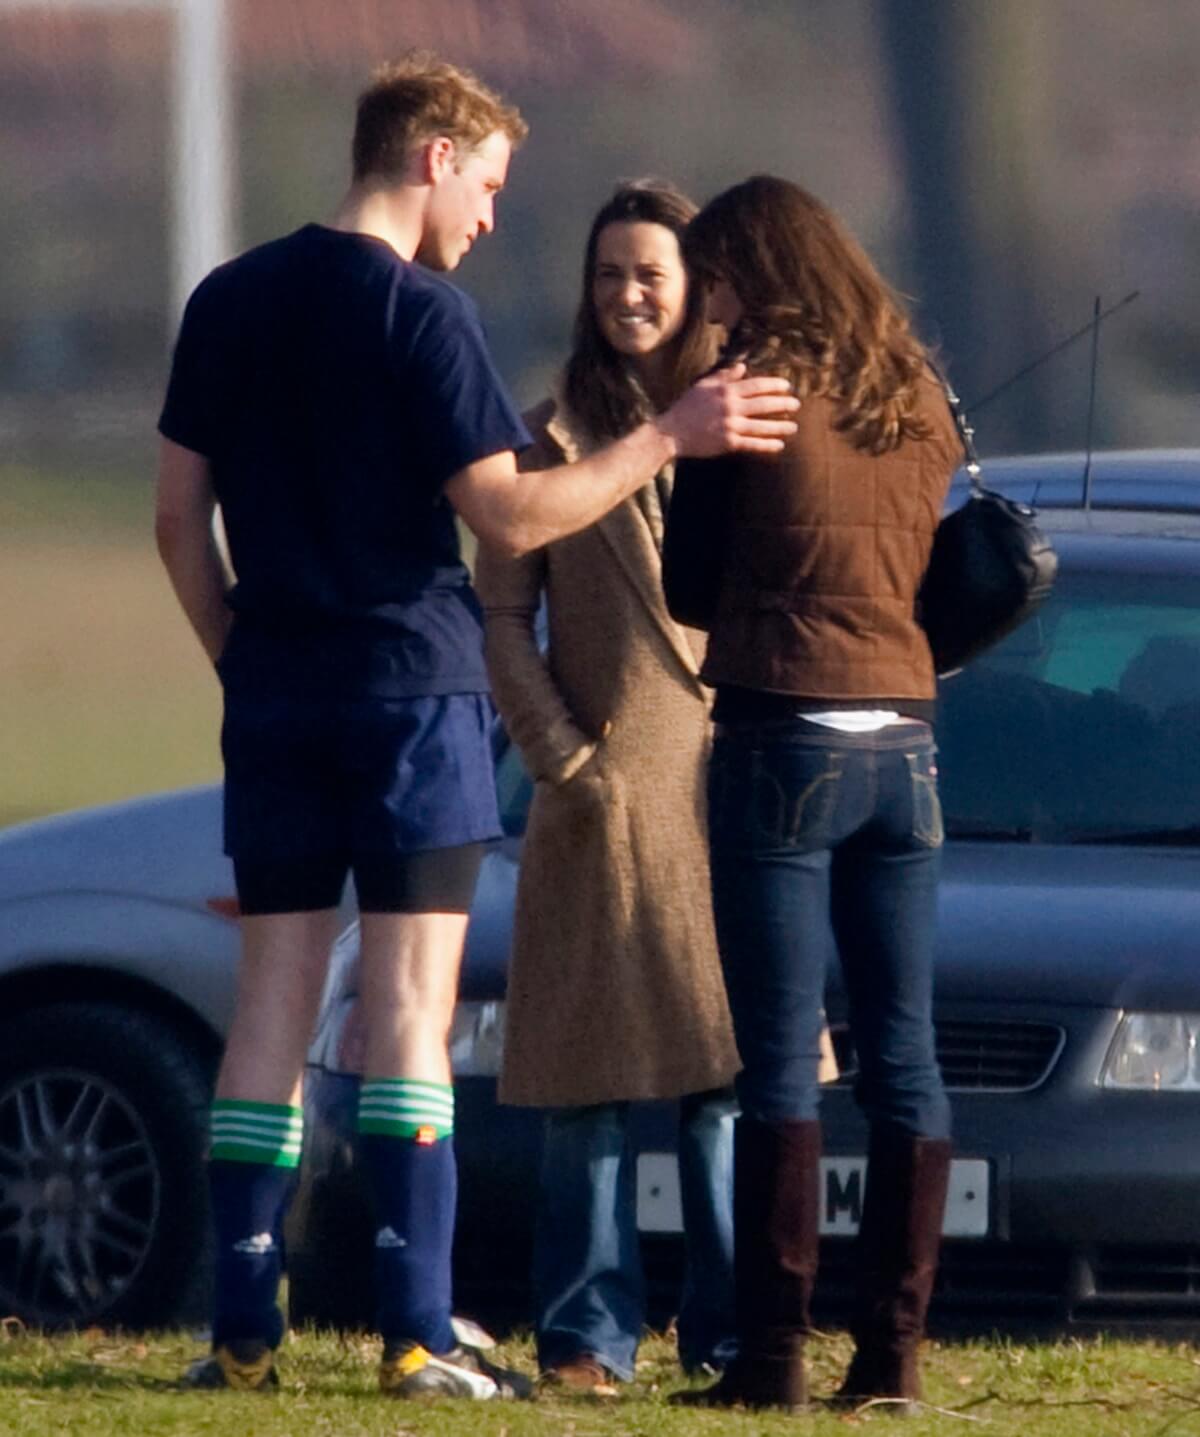 Prince William trying to comfort Kate Middleton, who is turned away from the cameras, during the Field Game in an old boys match at Eton College she attended with her sister Pippa Middleton